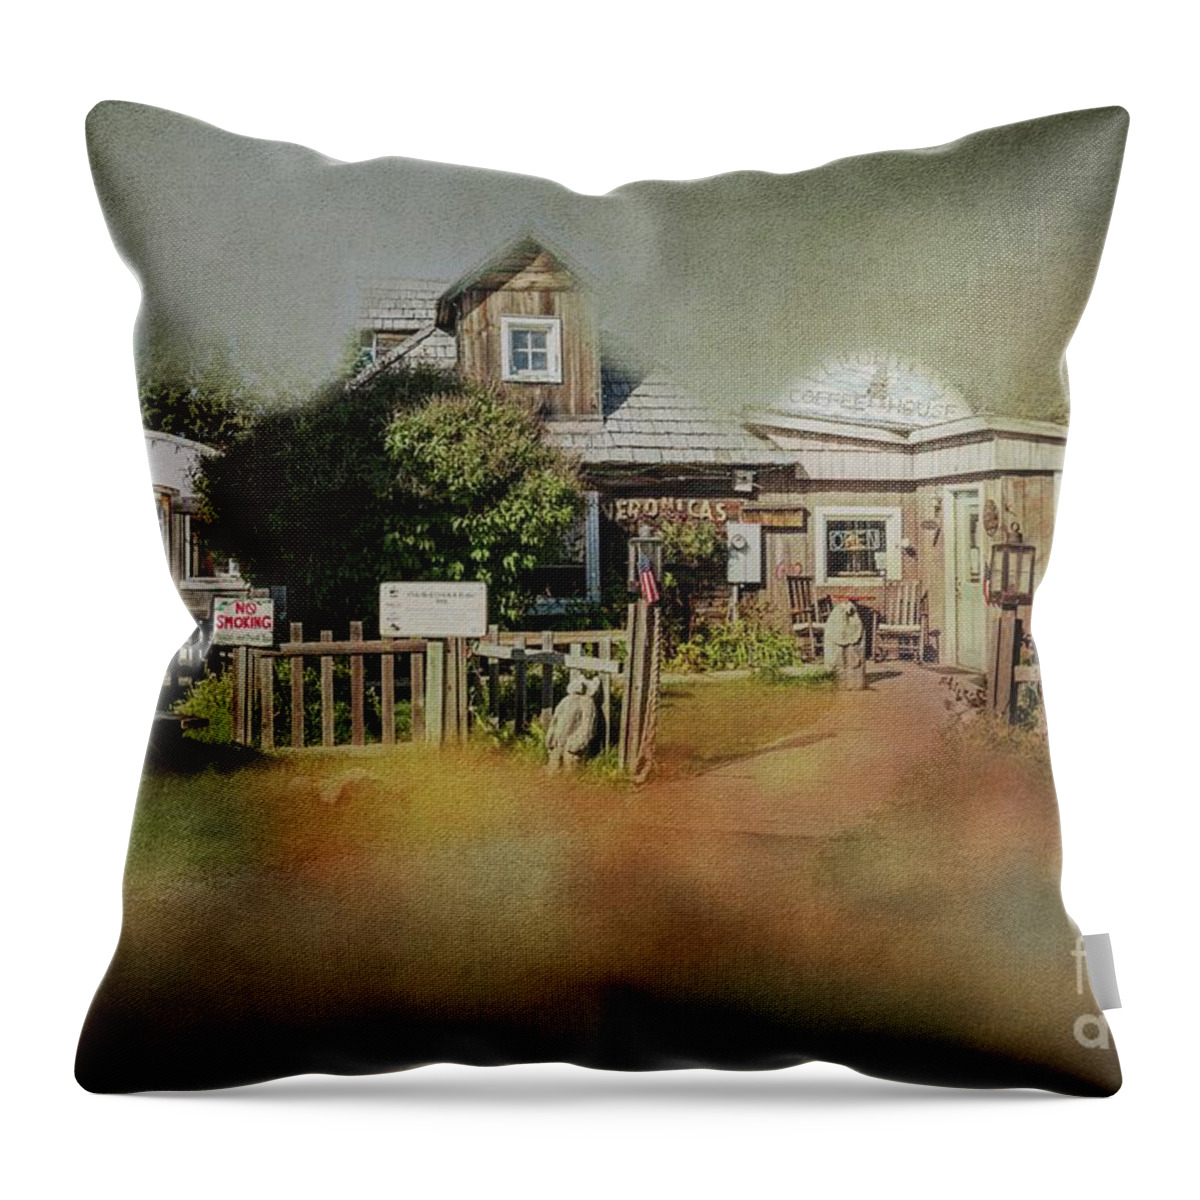 Veronica's Coffee House Throw Pillow featuring the photograph Veronica's Coffee House by Eva Lechner